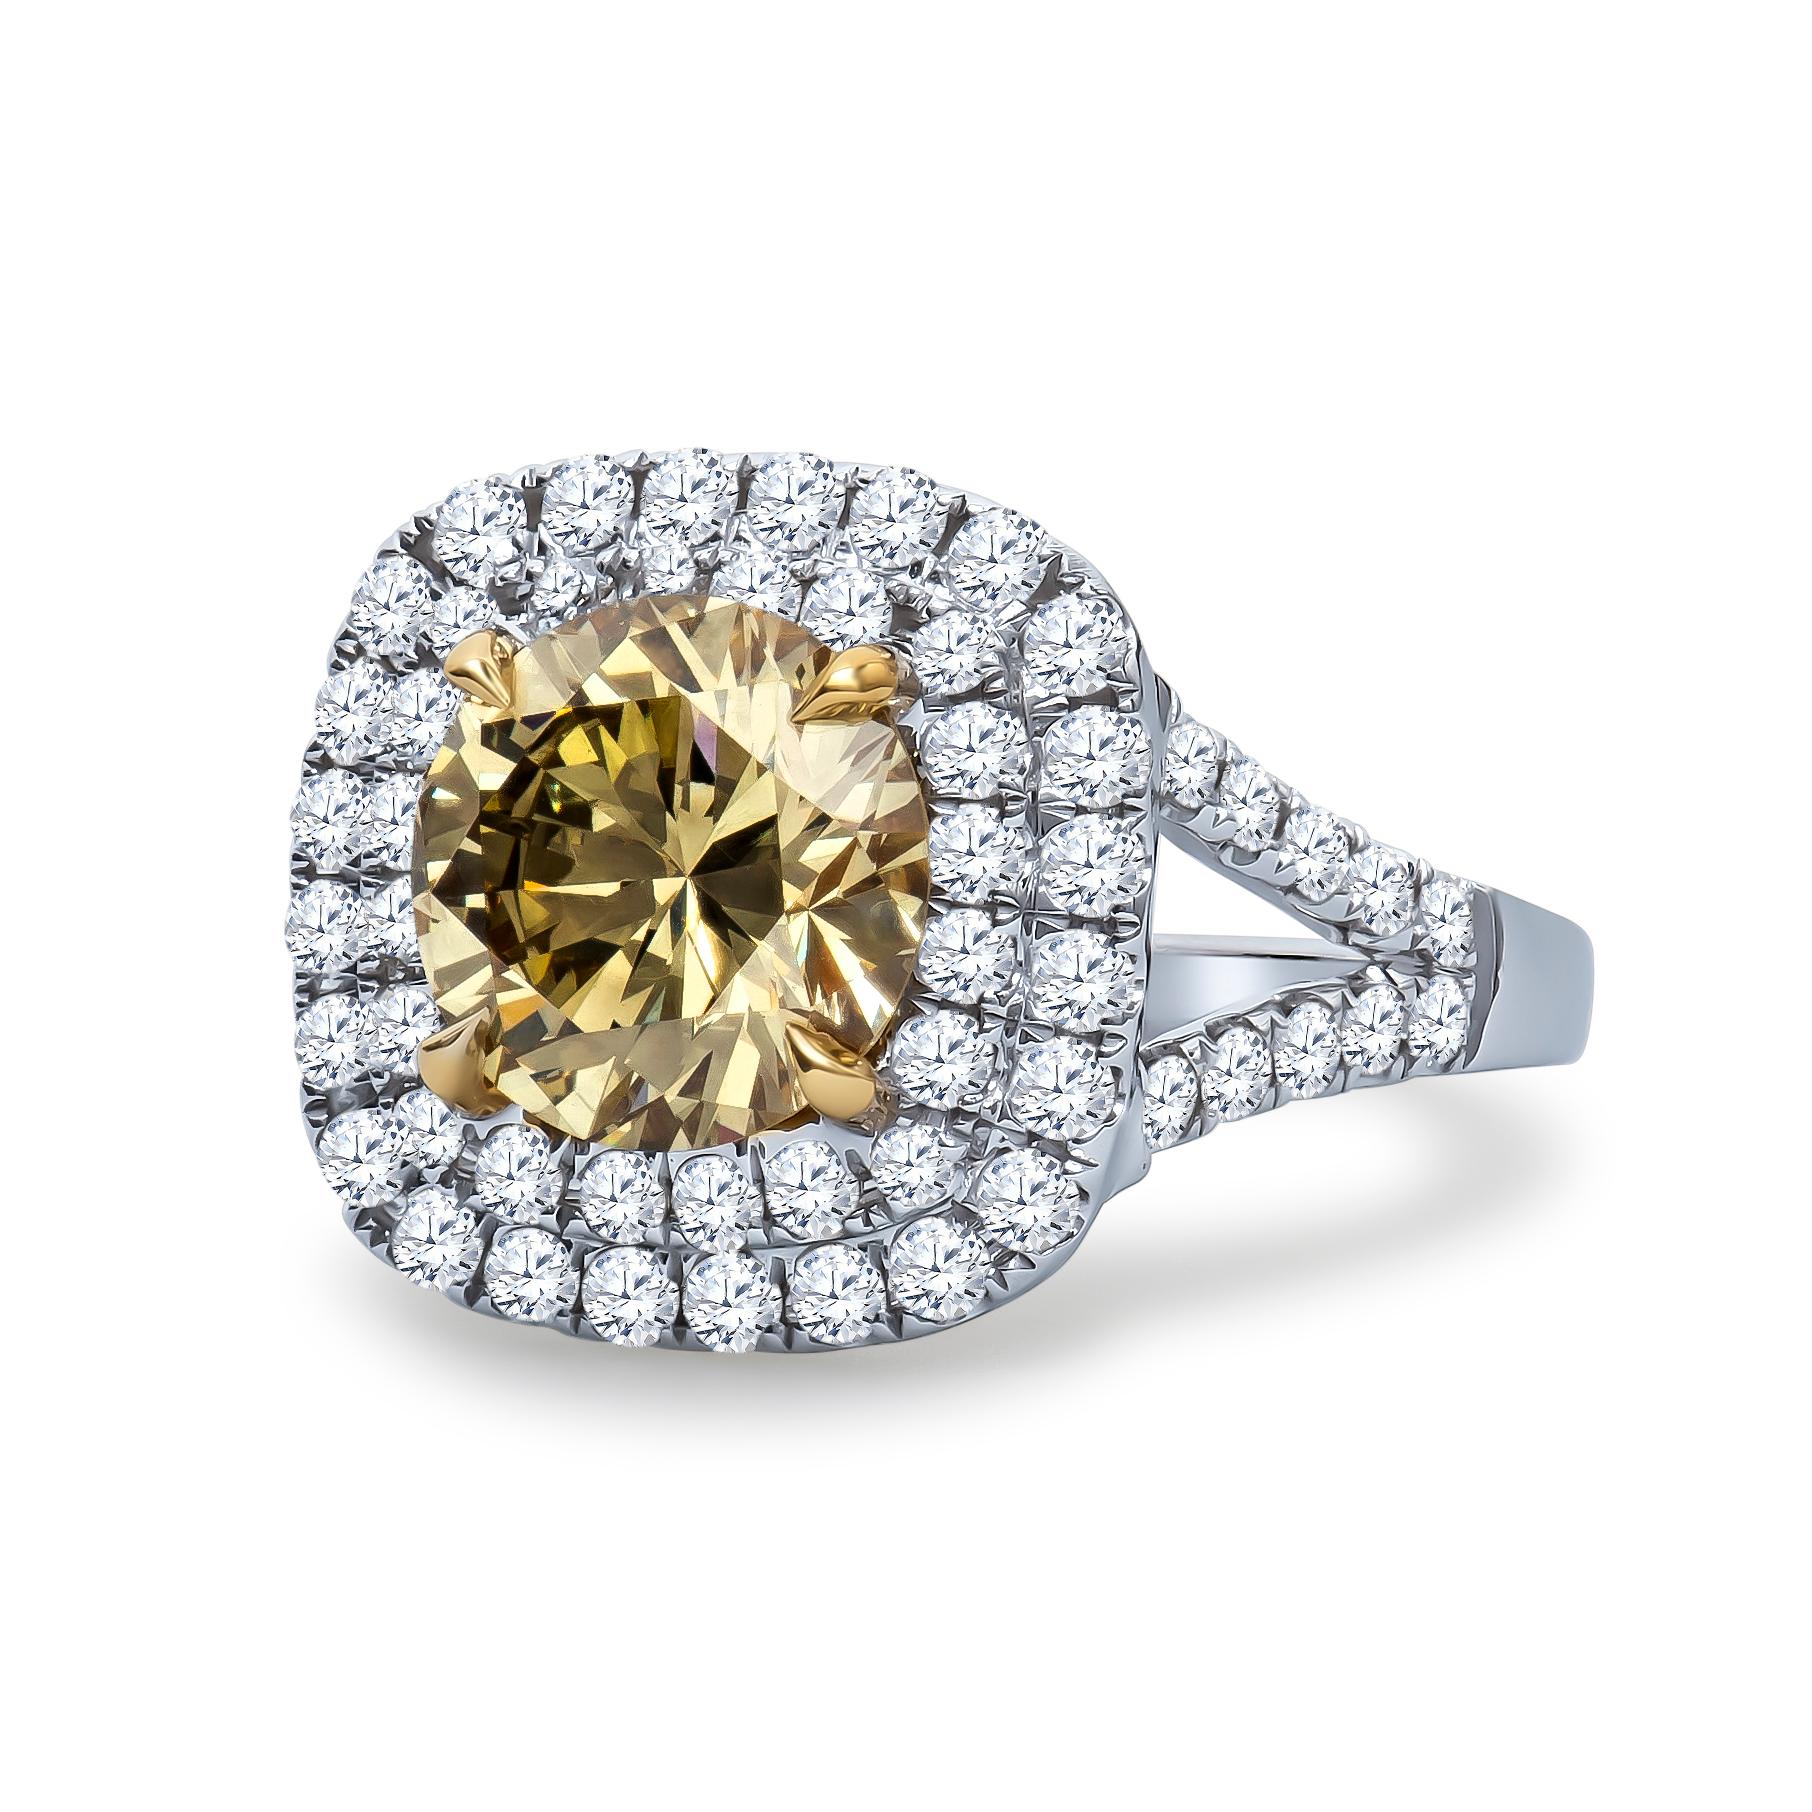 2.43 Carat, GIA certified, round brilliant cut 'natural fancy brownish greenish yellow' center diamond with a VS2 clarity. Double halo form in 0.94 carats total weight in accent diamonds set in an 18K white and yellow gold ring with filigree detail.